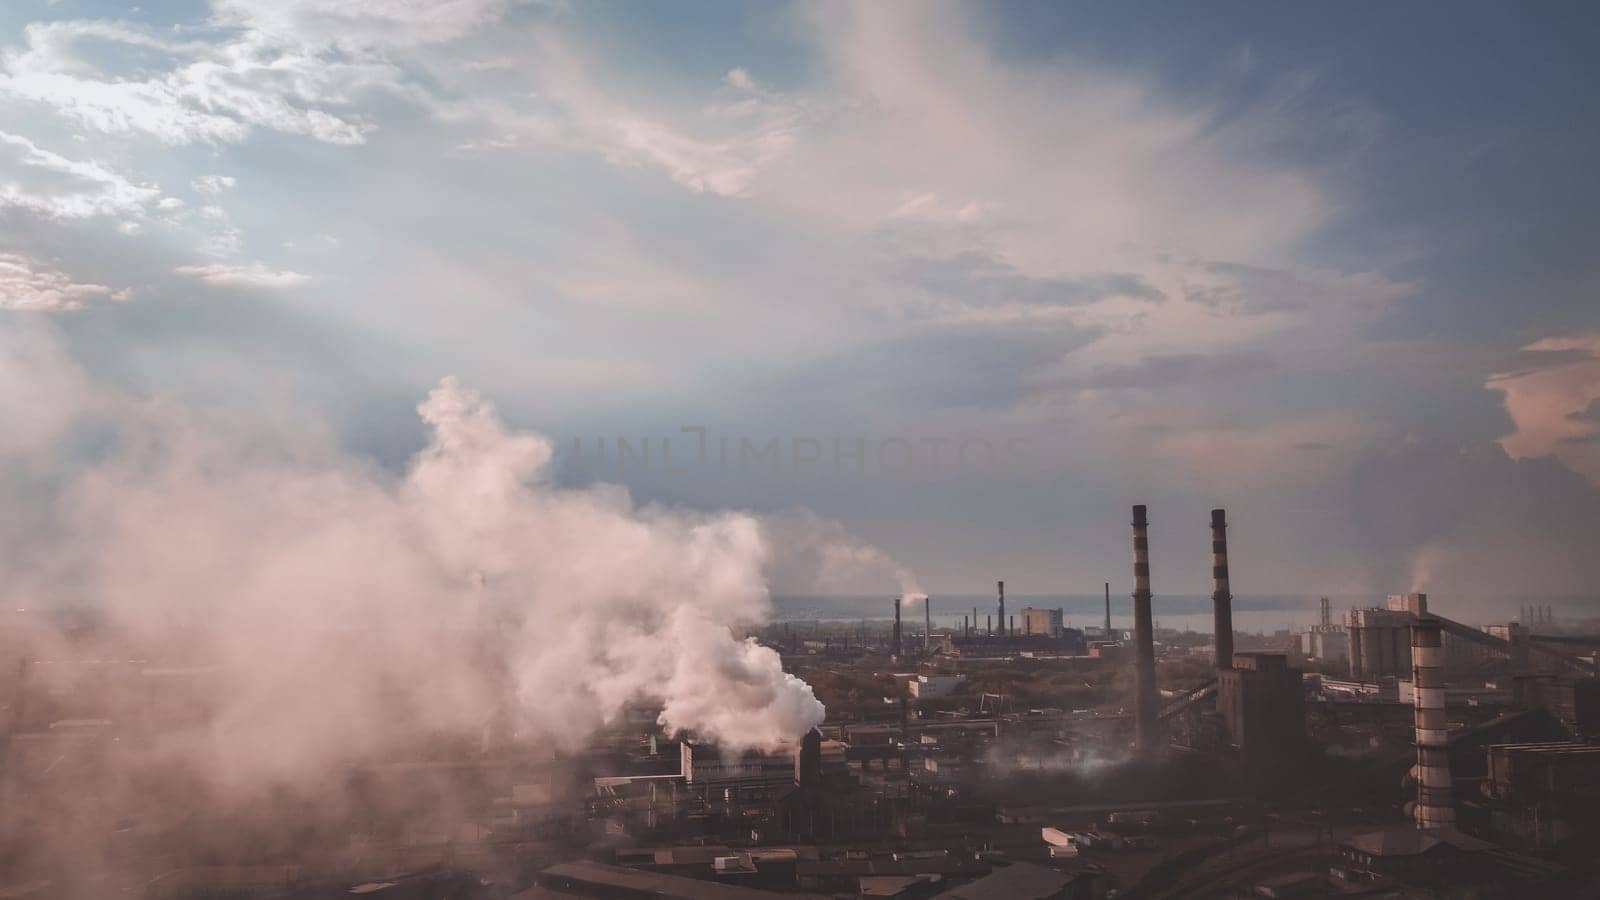 smoke from the chimney. view point of smoking chimney with orange white colors. steam and smoke coming out of factory pipes, industrial zone with dirty air